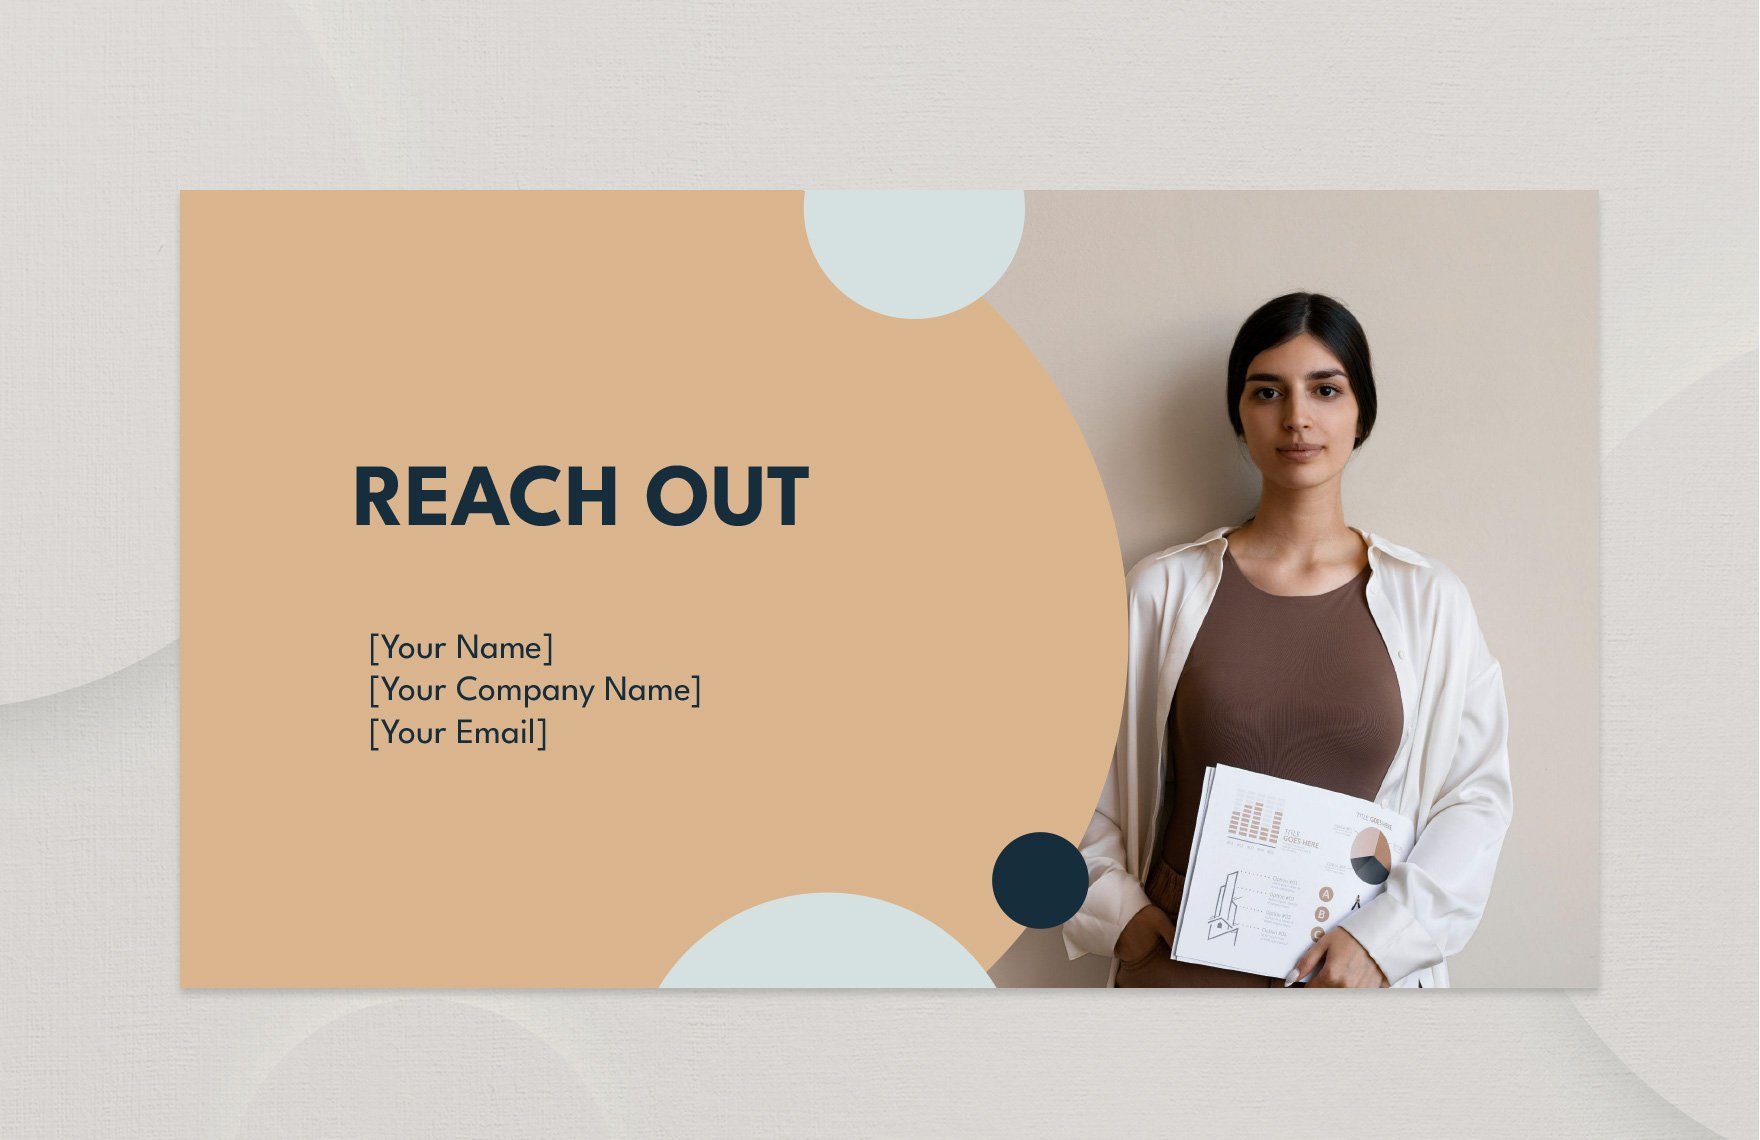 Branding and Marketing Strategy Presentation Template